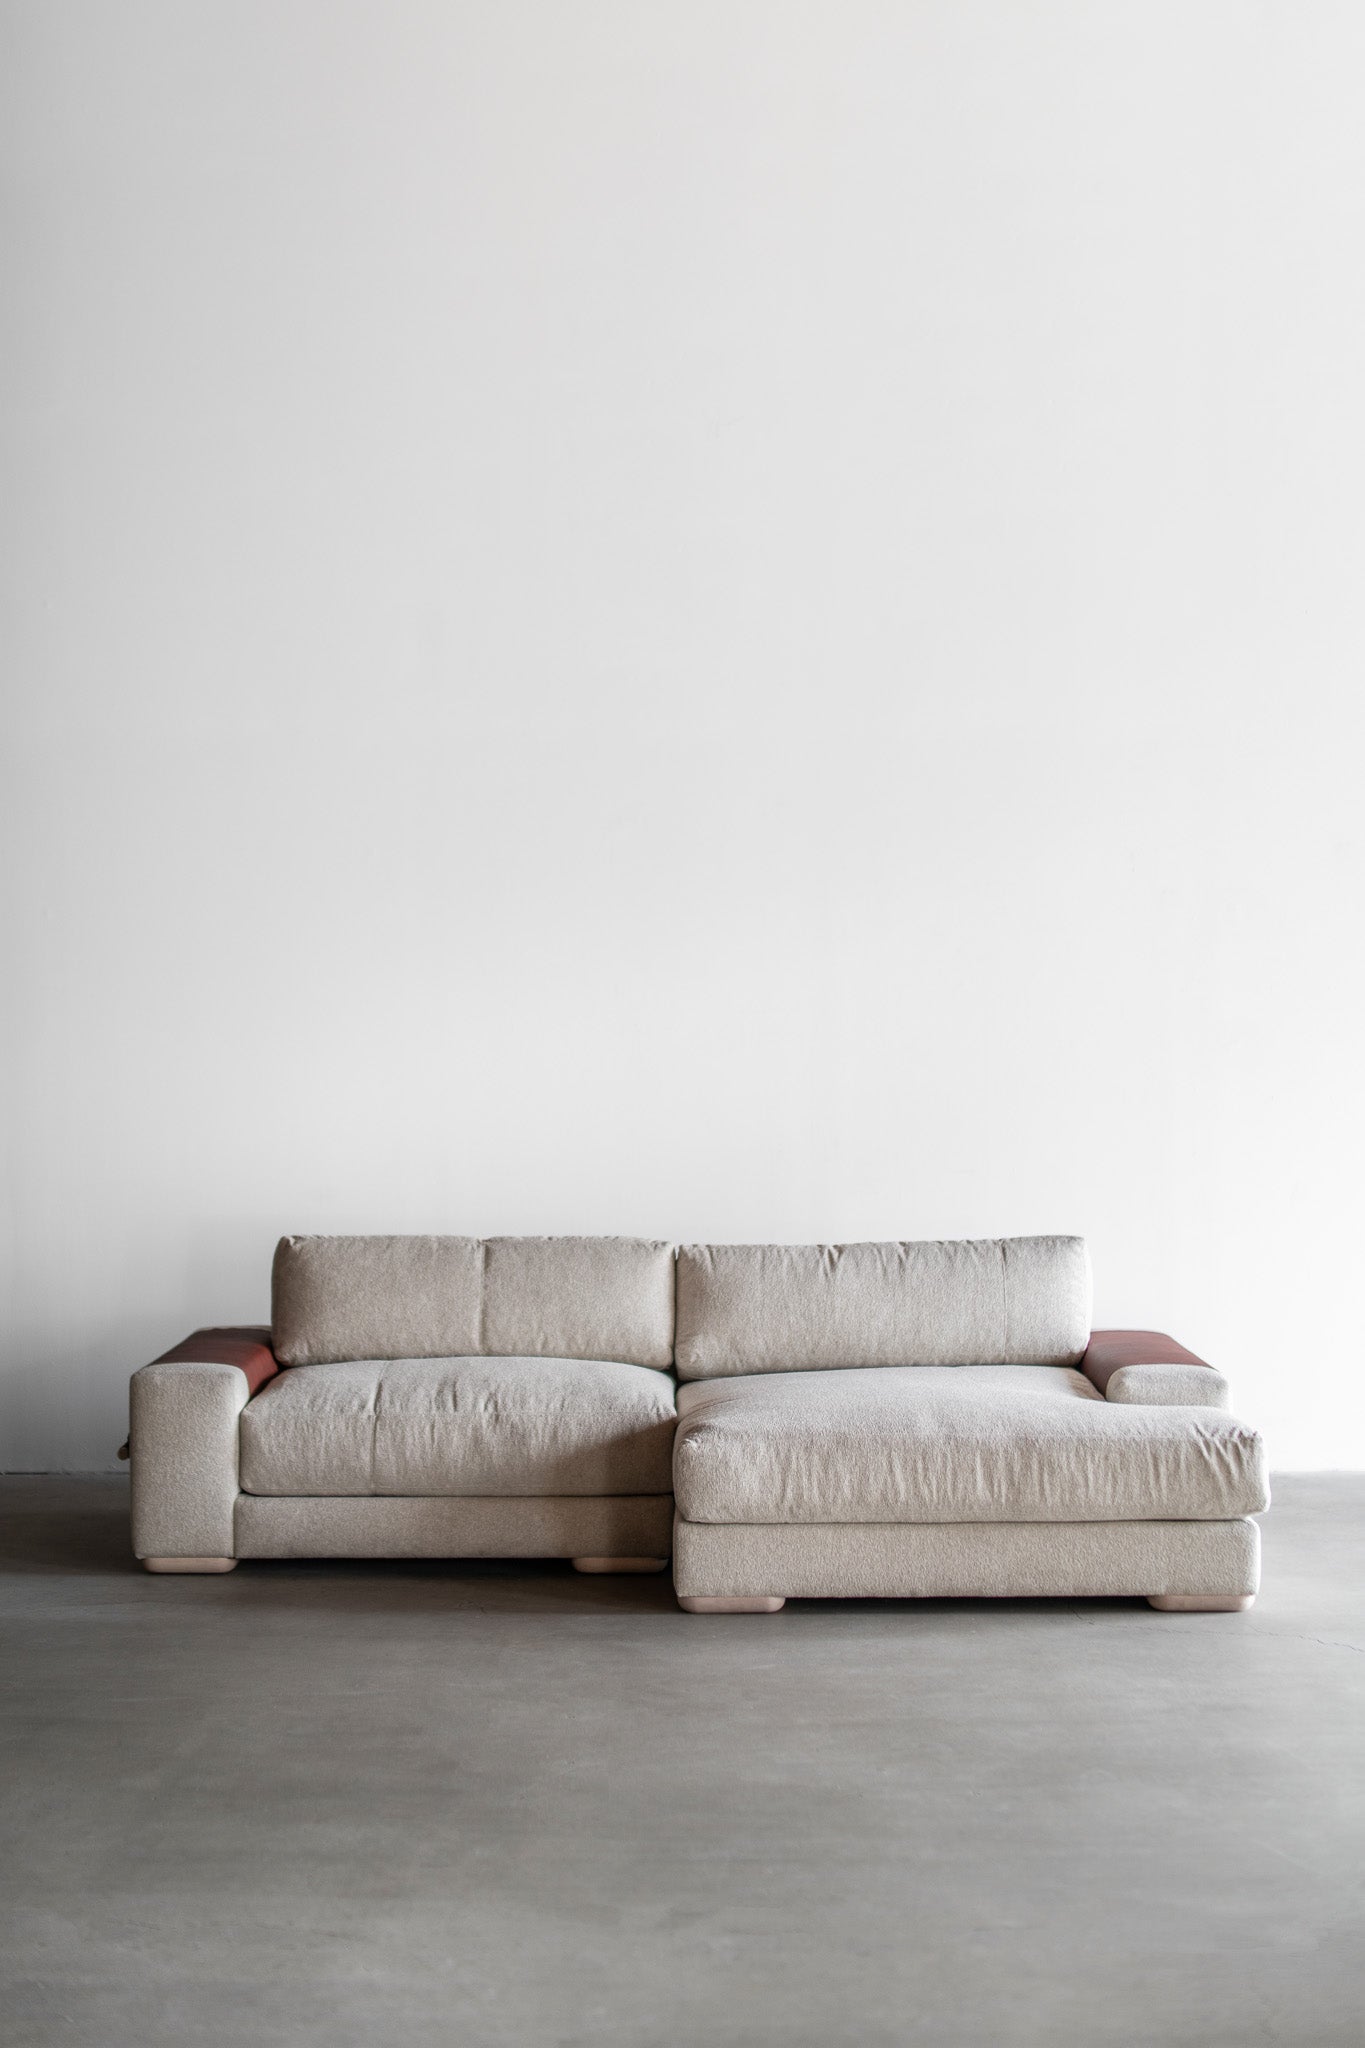 Full shot of Sofa with leather on arms